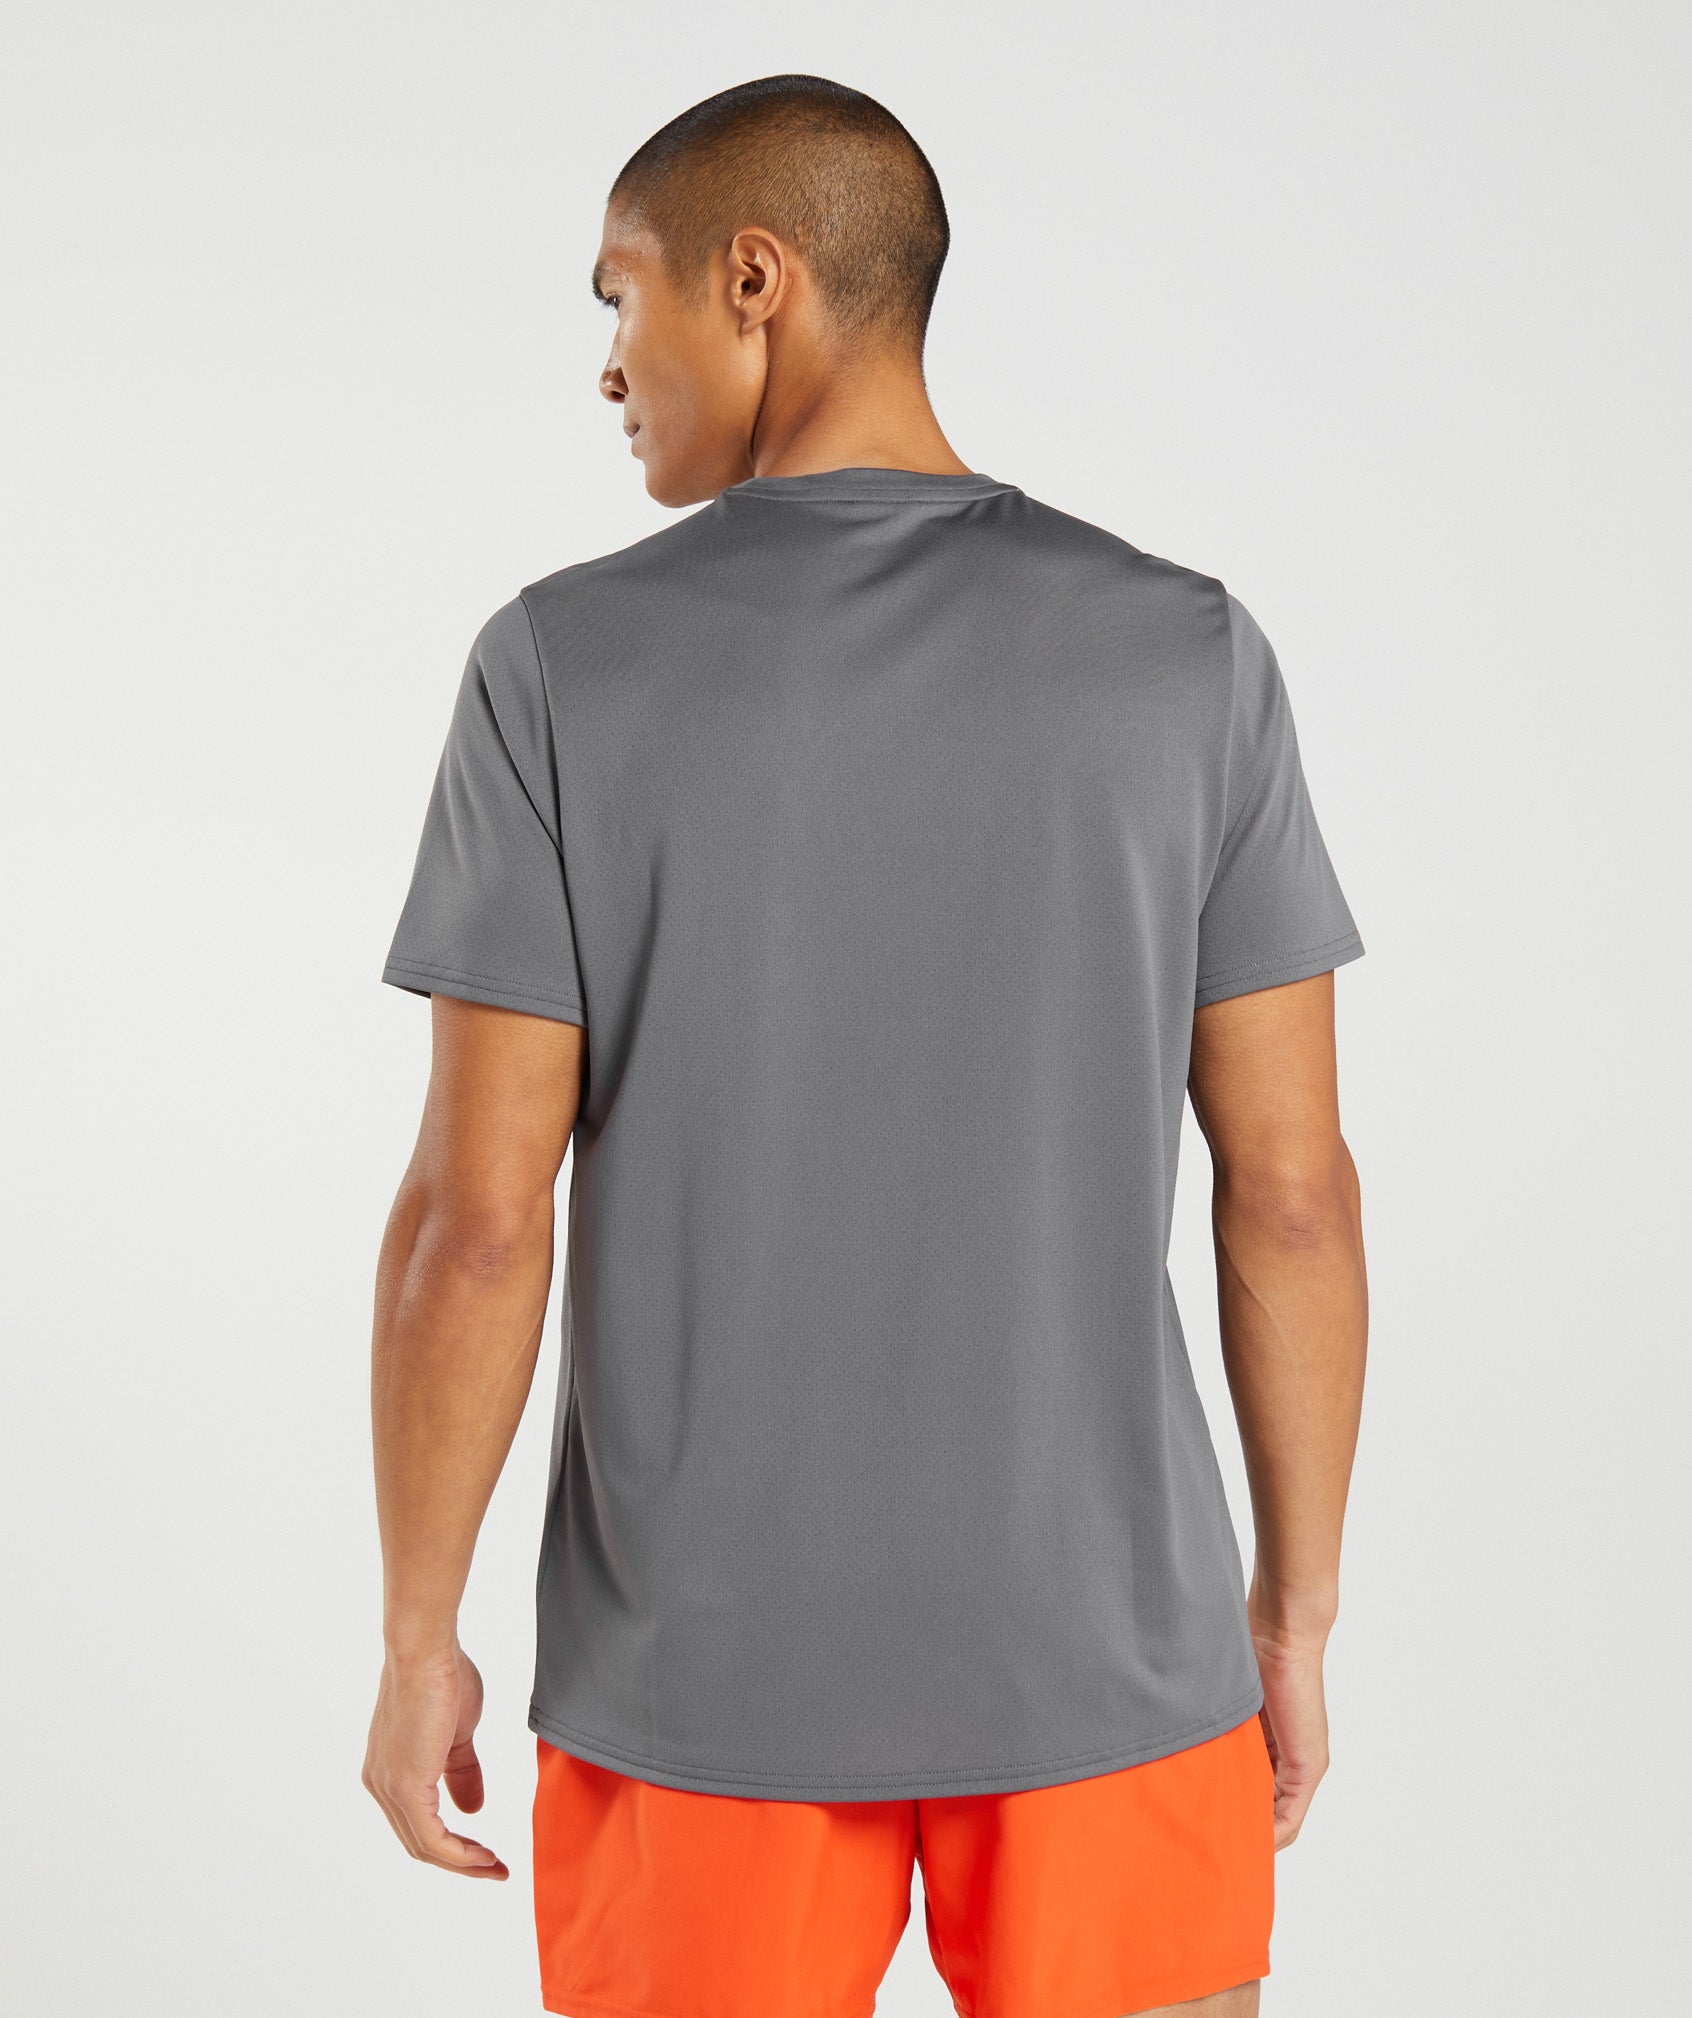 Arrival T-Shirt in Silhouette Grey